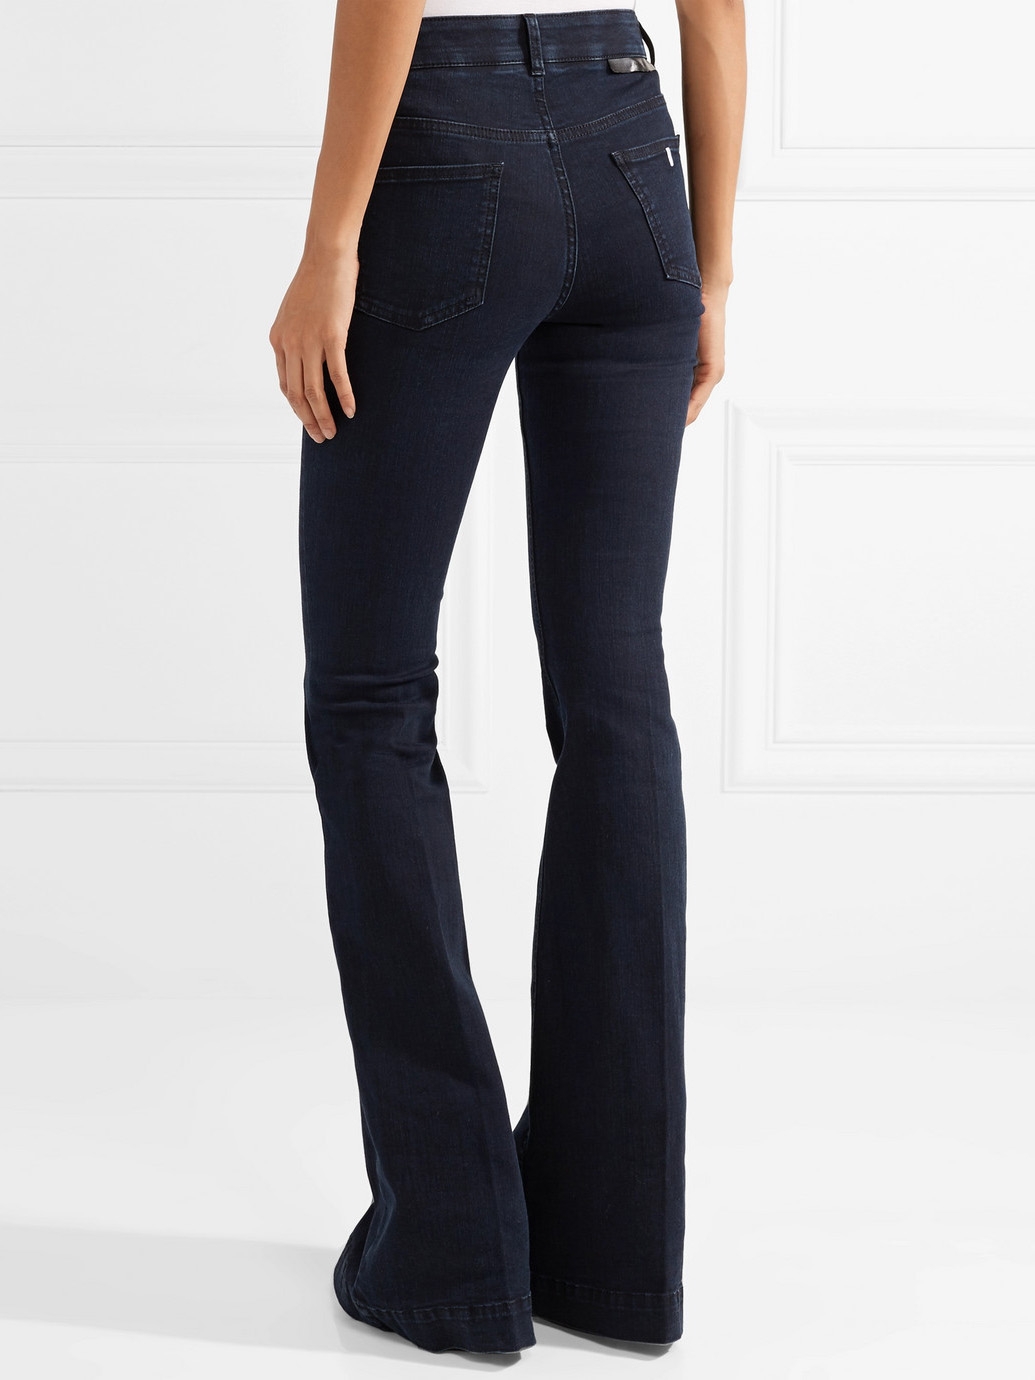 Boutique MCCARTNEY Dark The '70s high-rise flared jeans Retail price €325 Size 26